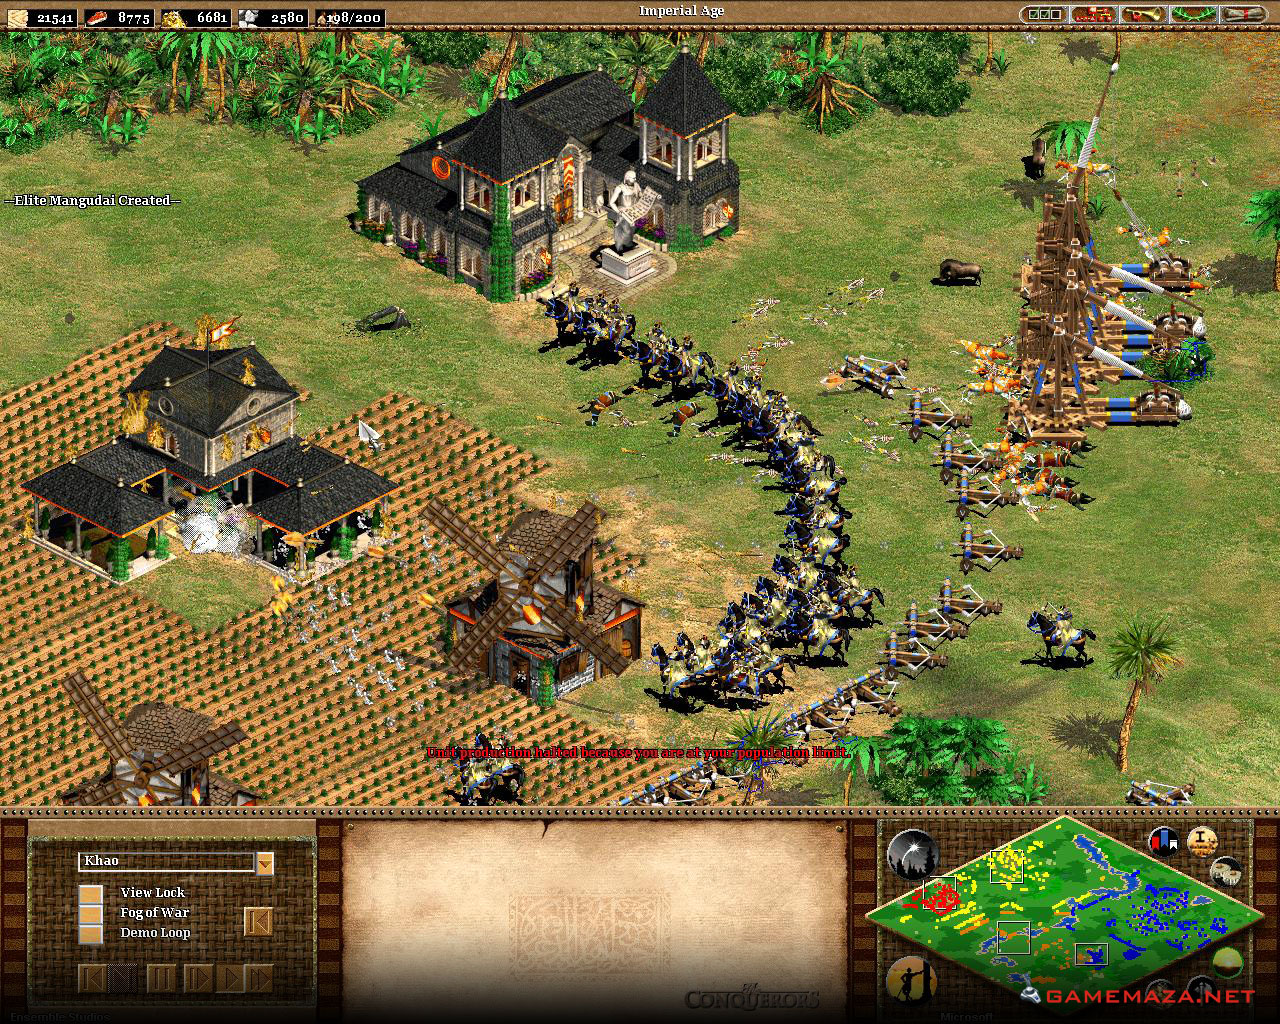 Age of empires ii free download windows 10